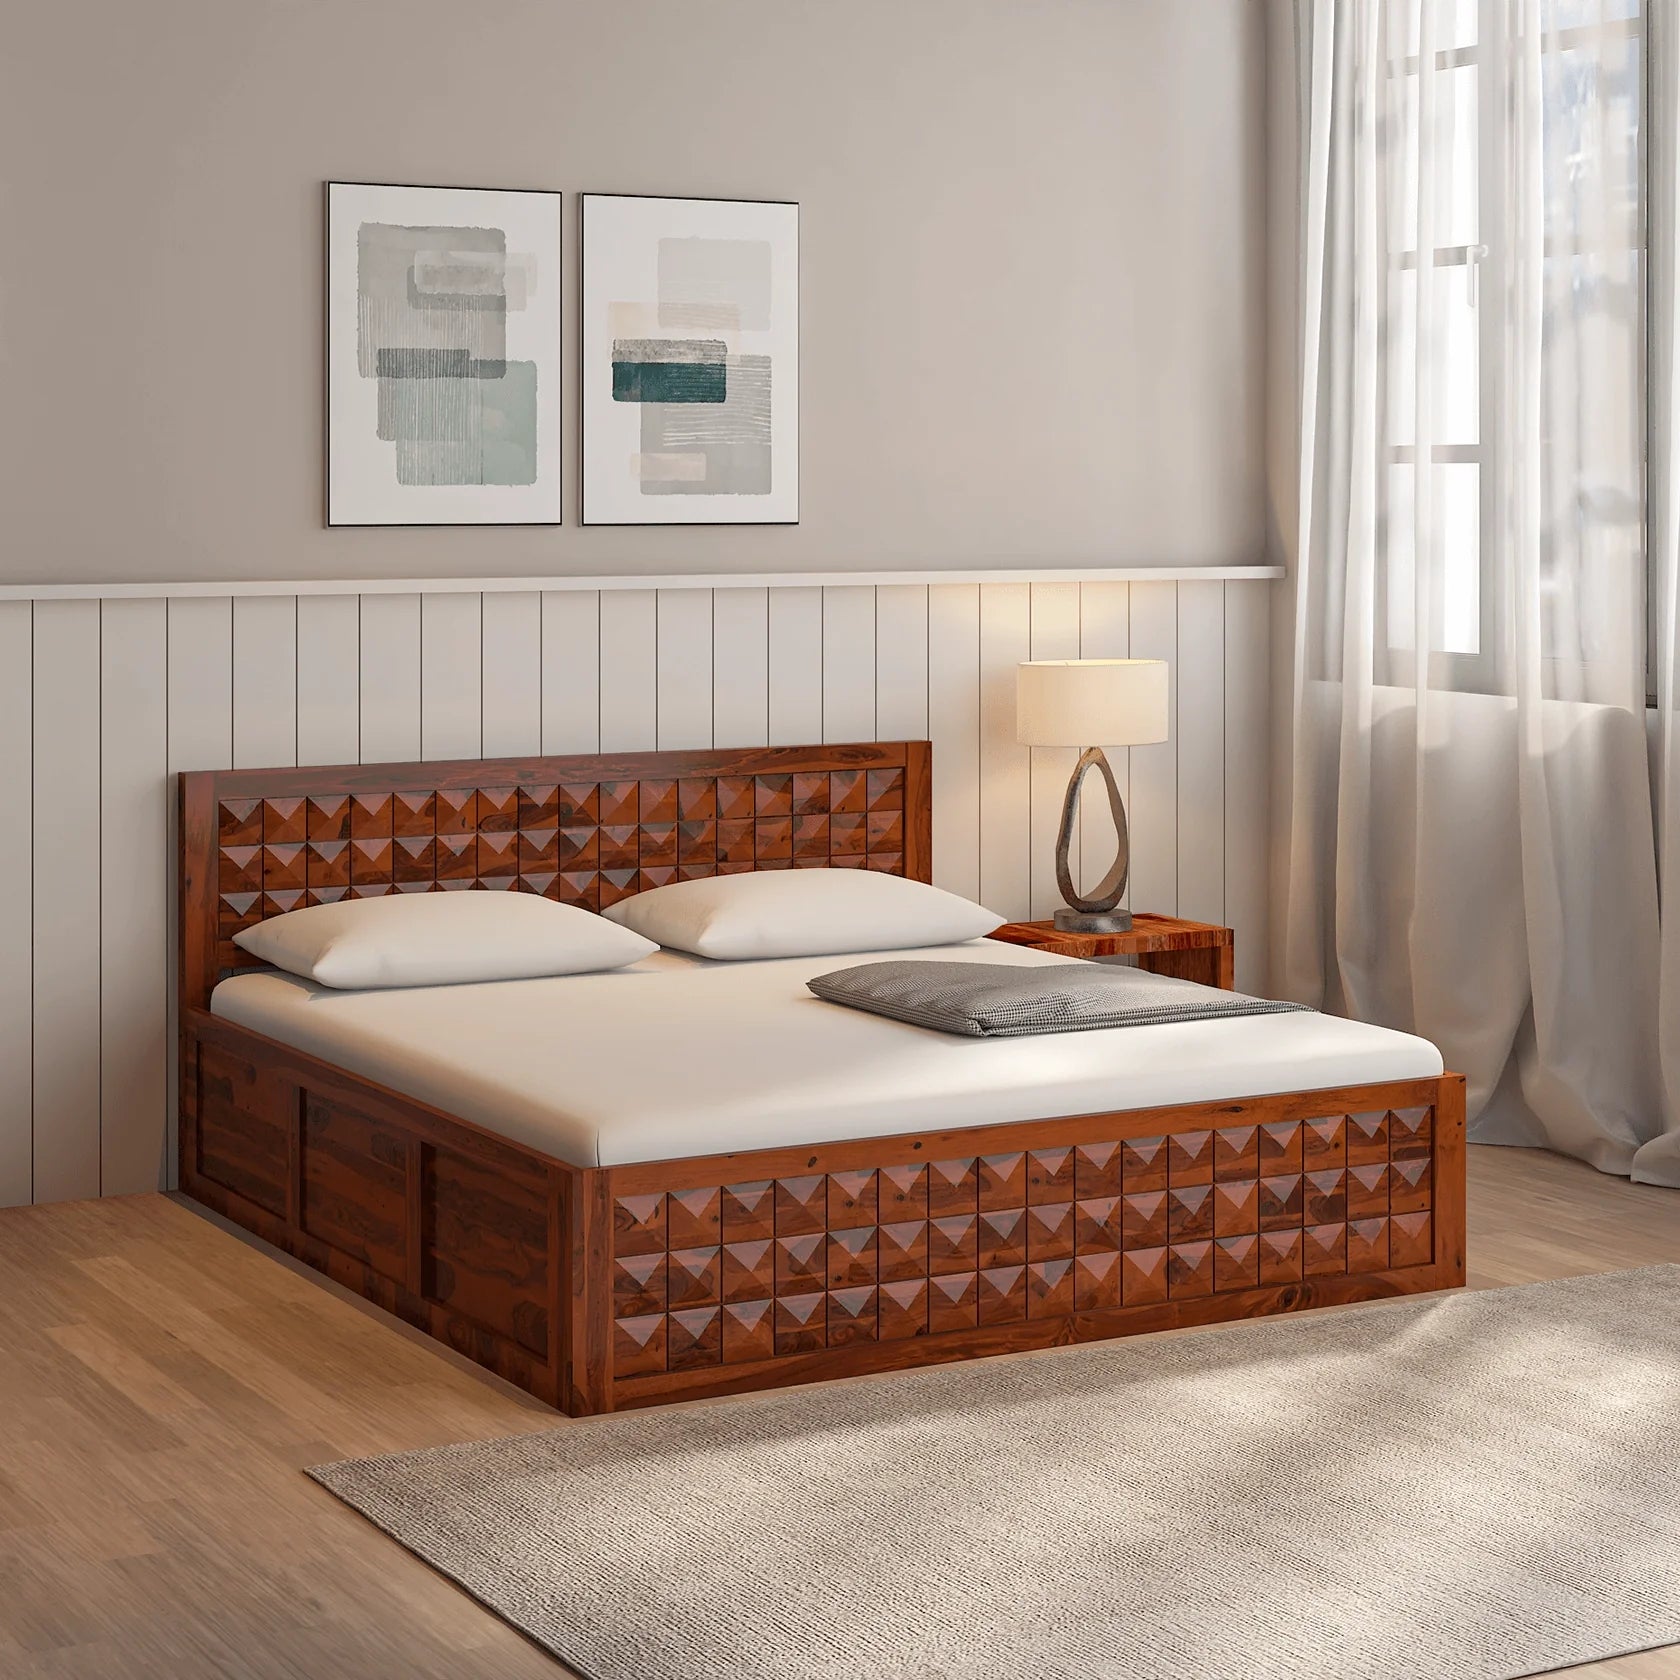 Wakeup Pluto bed with storage Miniature